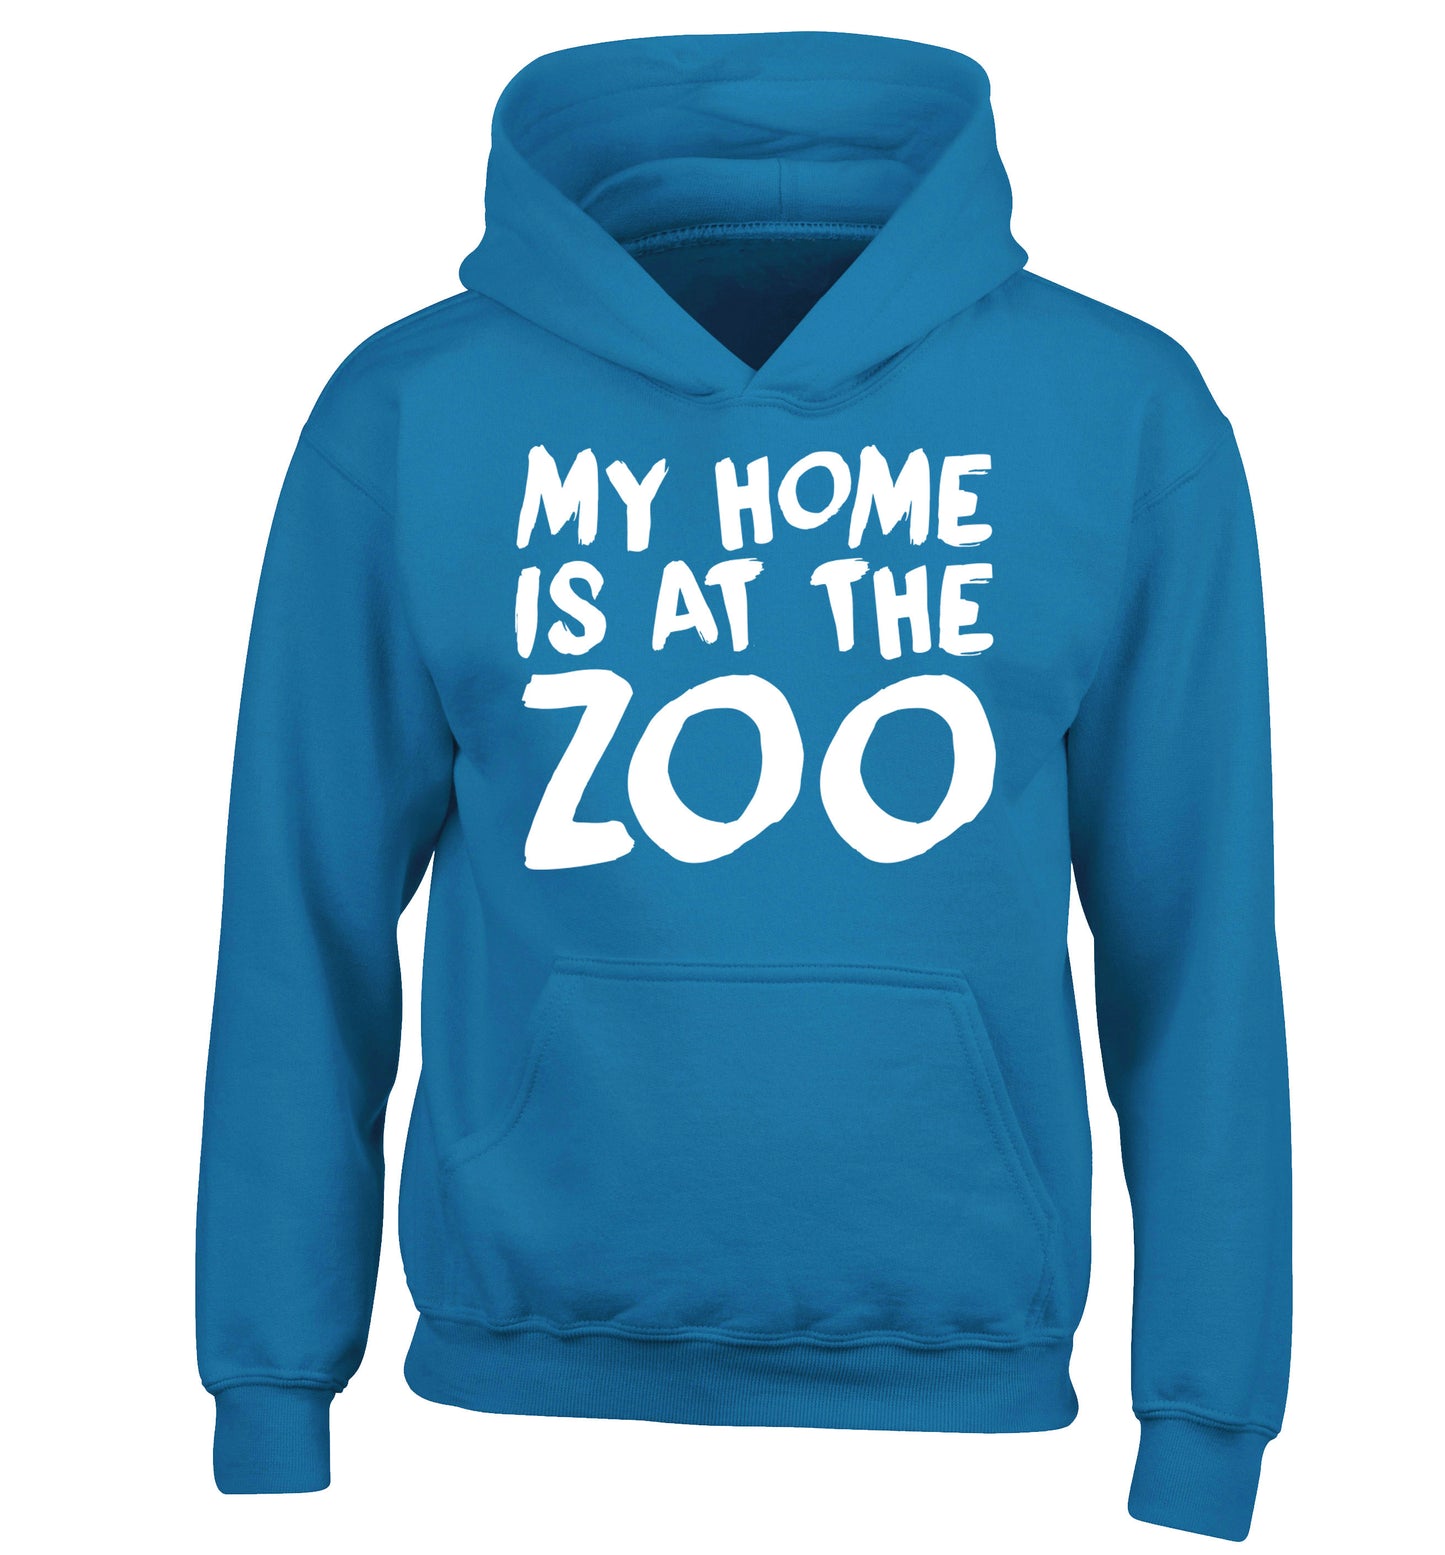 My home is at the zoo children's blue hoodie 12-14 Years